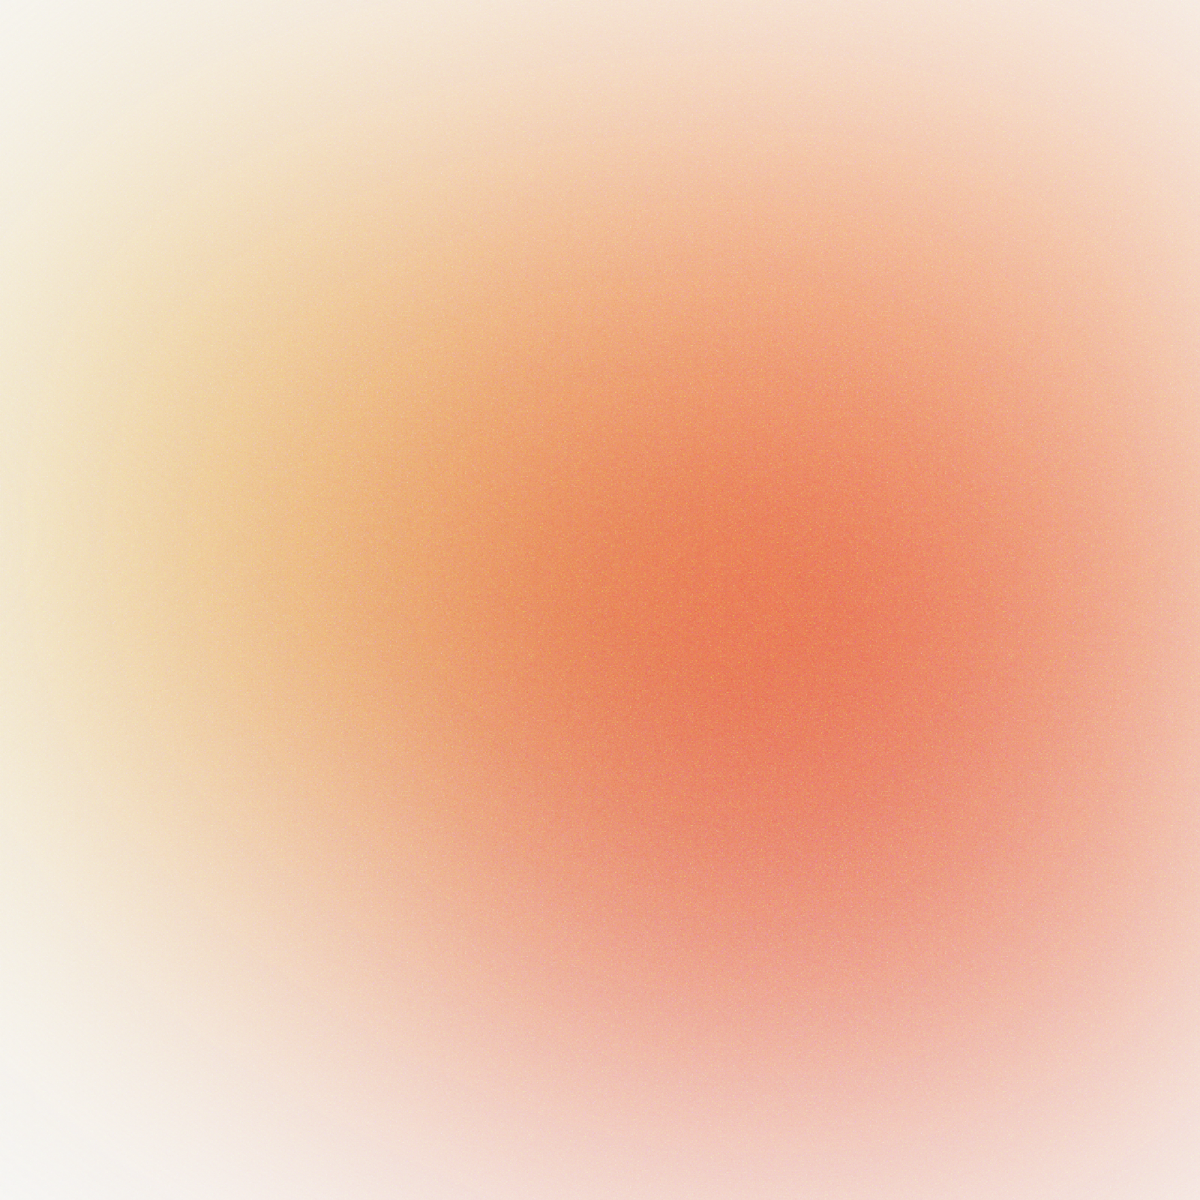 A gradient with a noise texture.